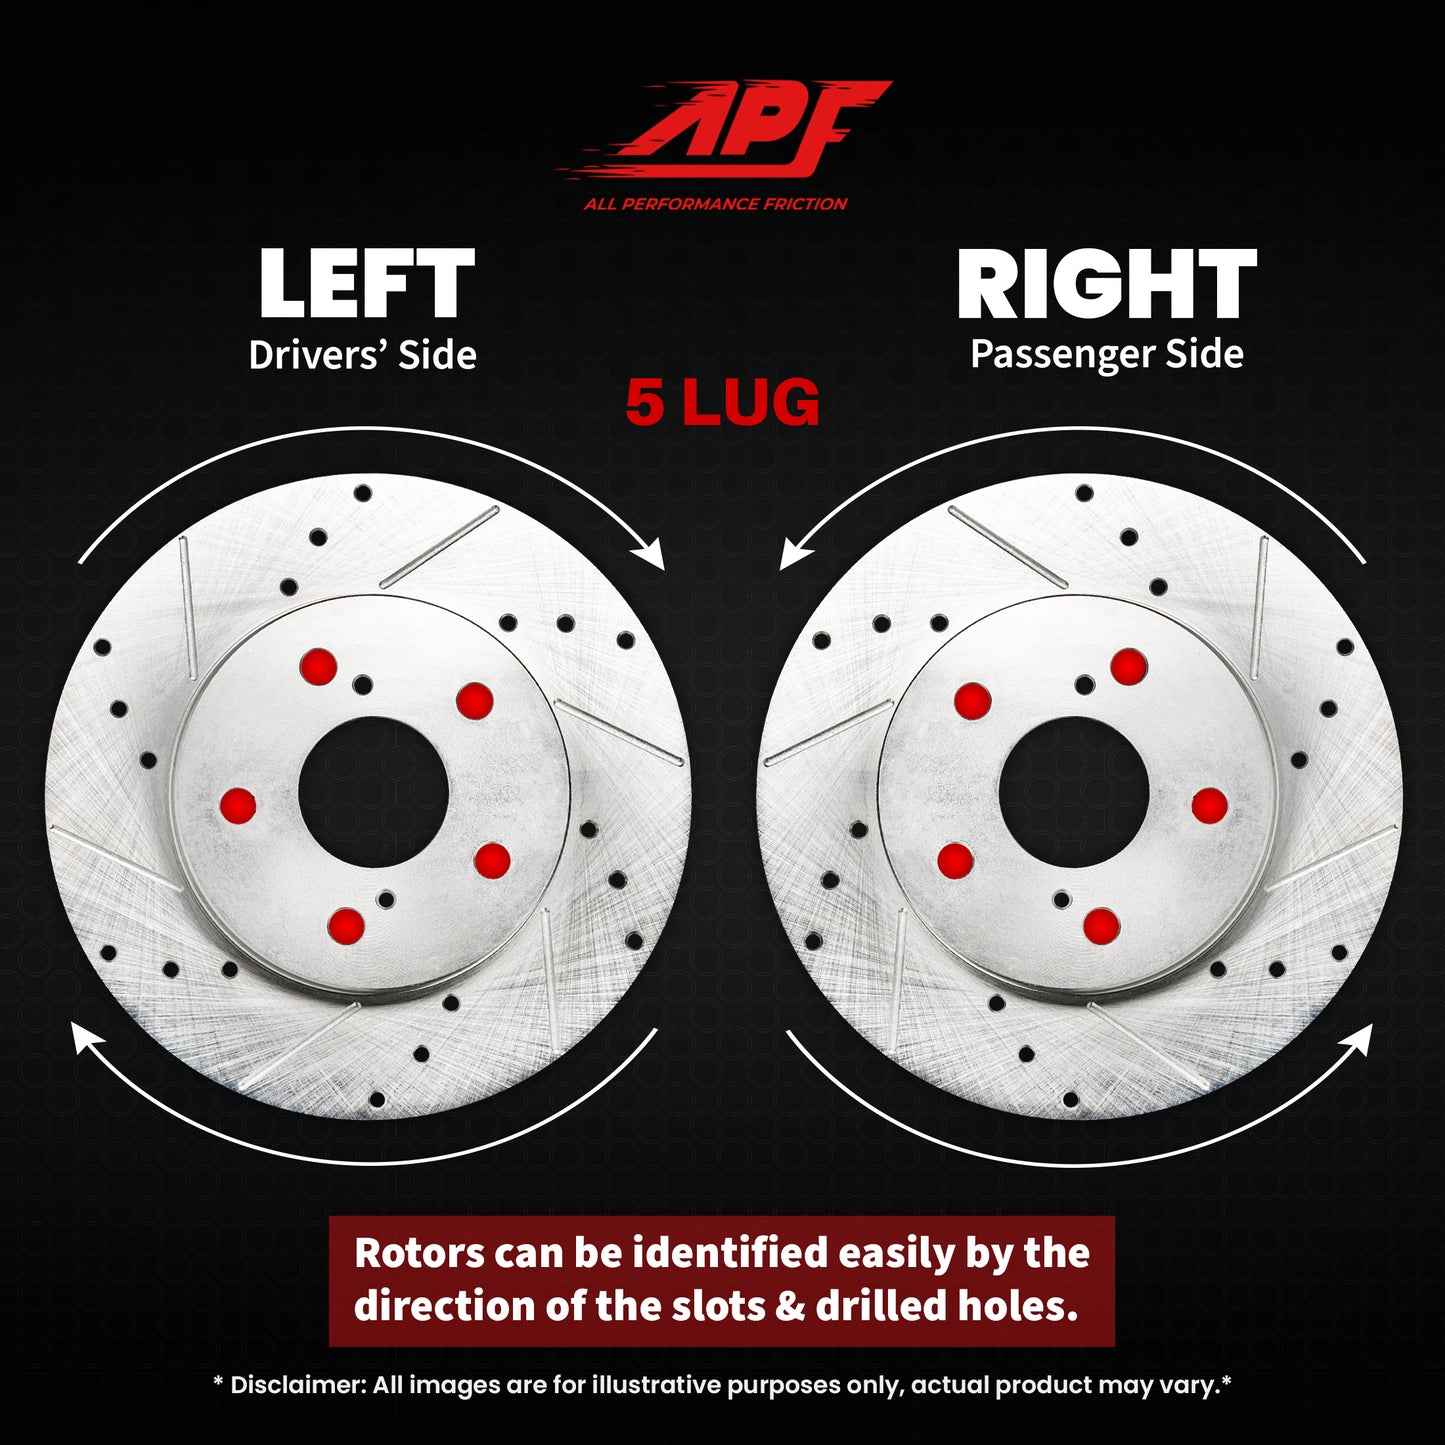 APF All Performance Friction Rear Rotors compatible with Mitsubishi Outlander Sport 2011-2012 Zinc Drilled Slotted Rotors | $118.4